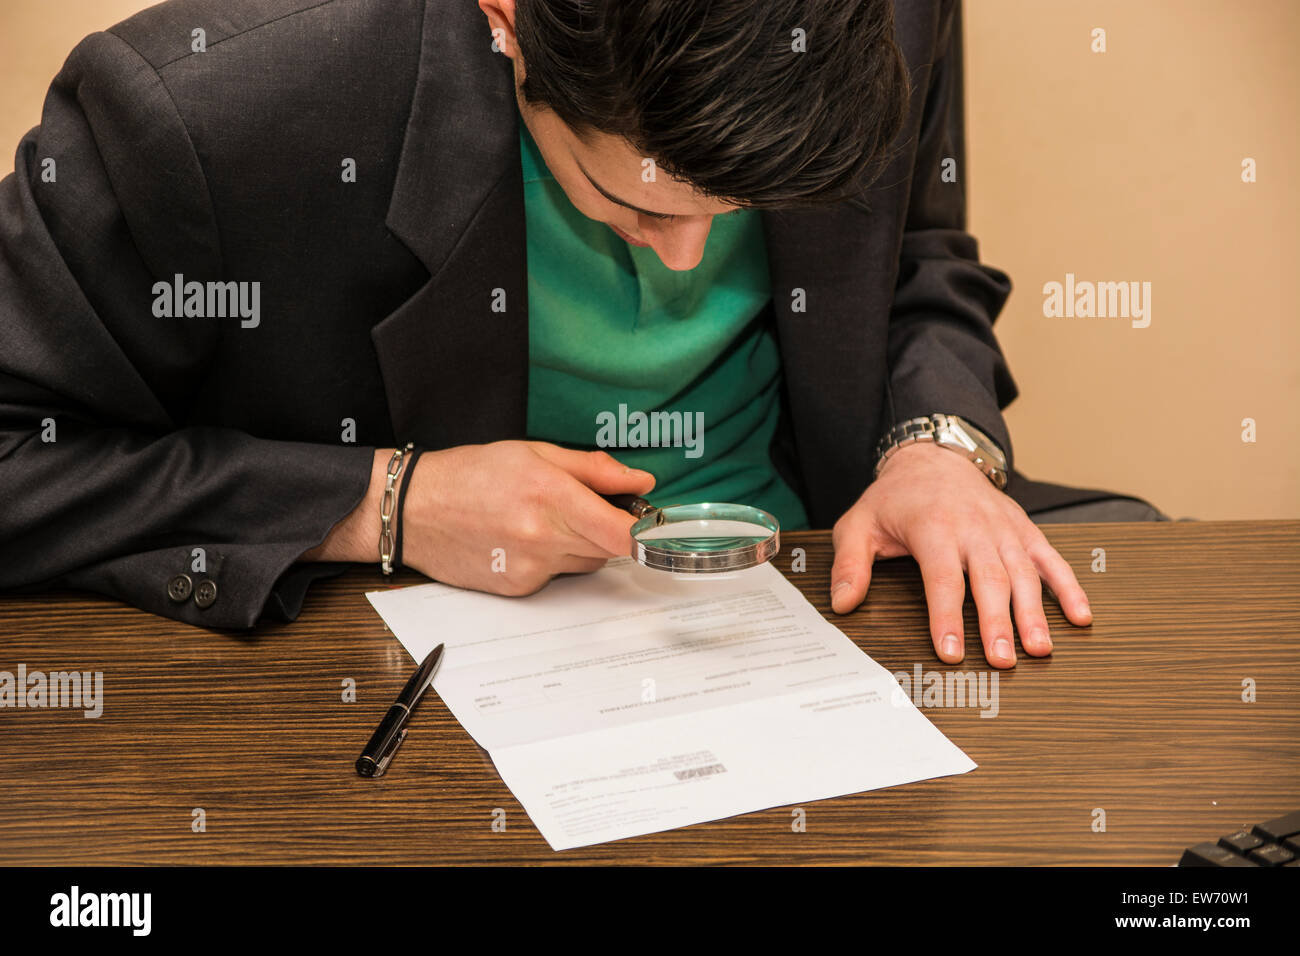 Young Man Sitting at Desk Scrutinizing Paper Contract with Magnifying Glass Prior to Signing Stock Photo